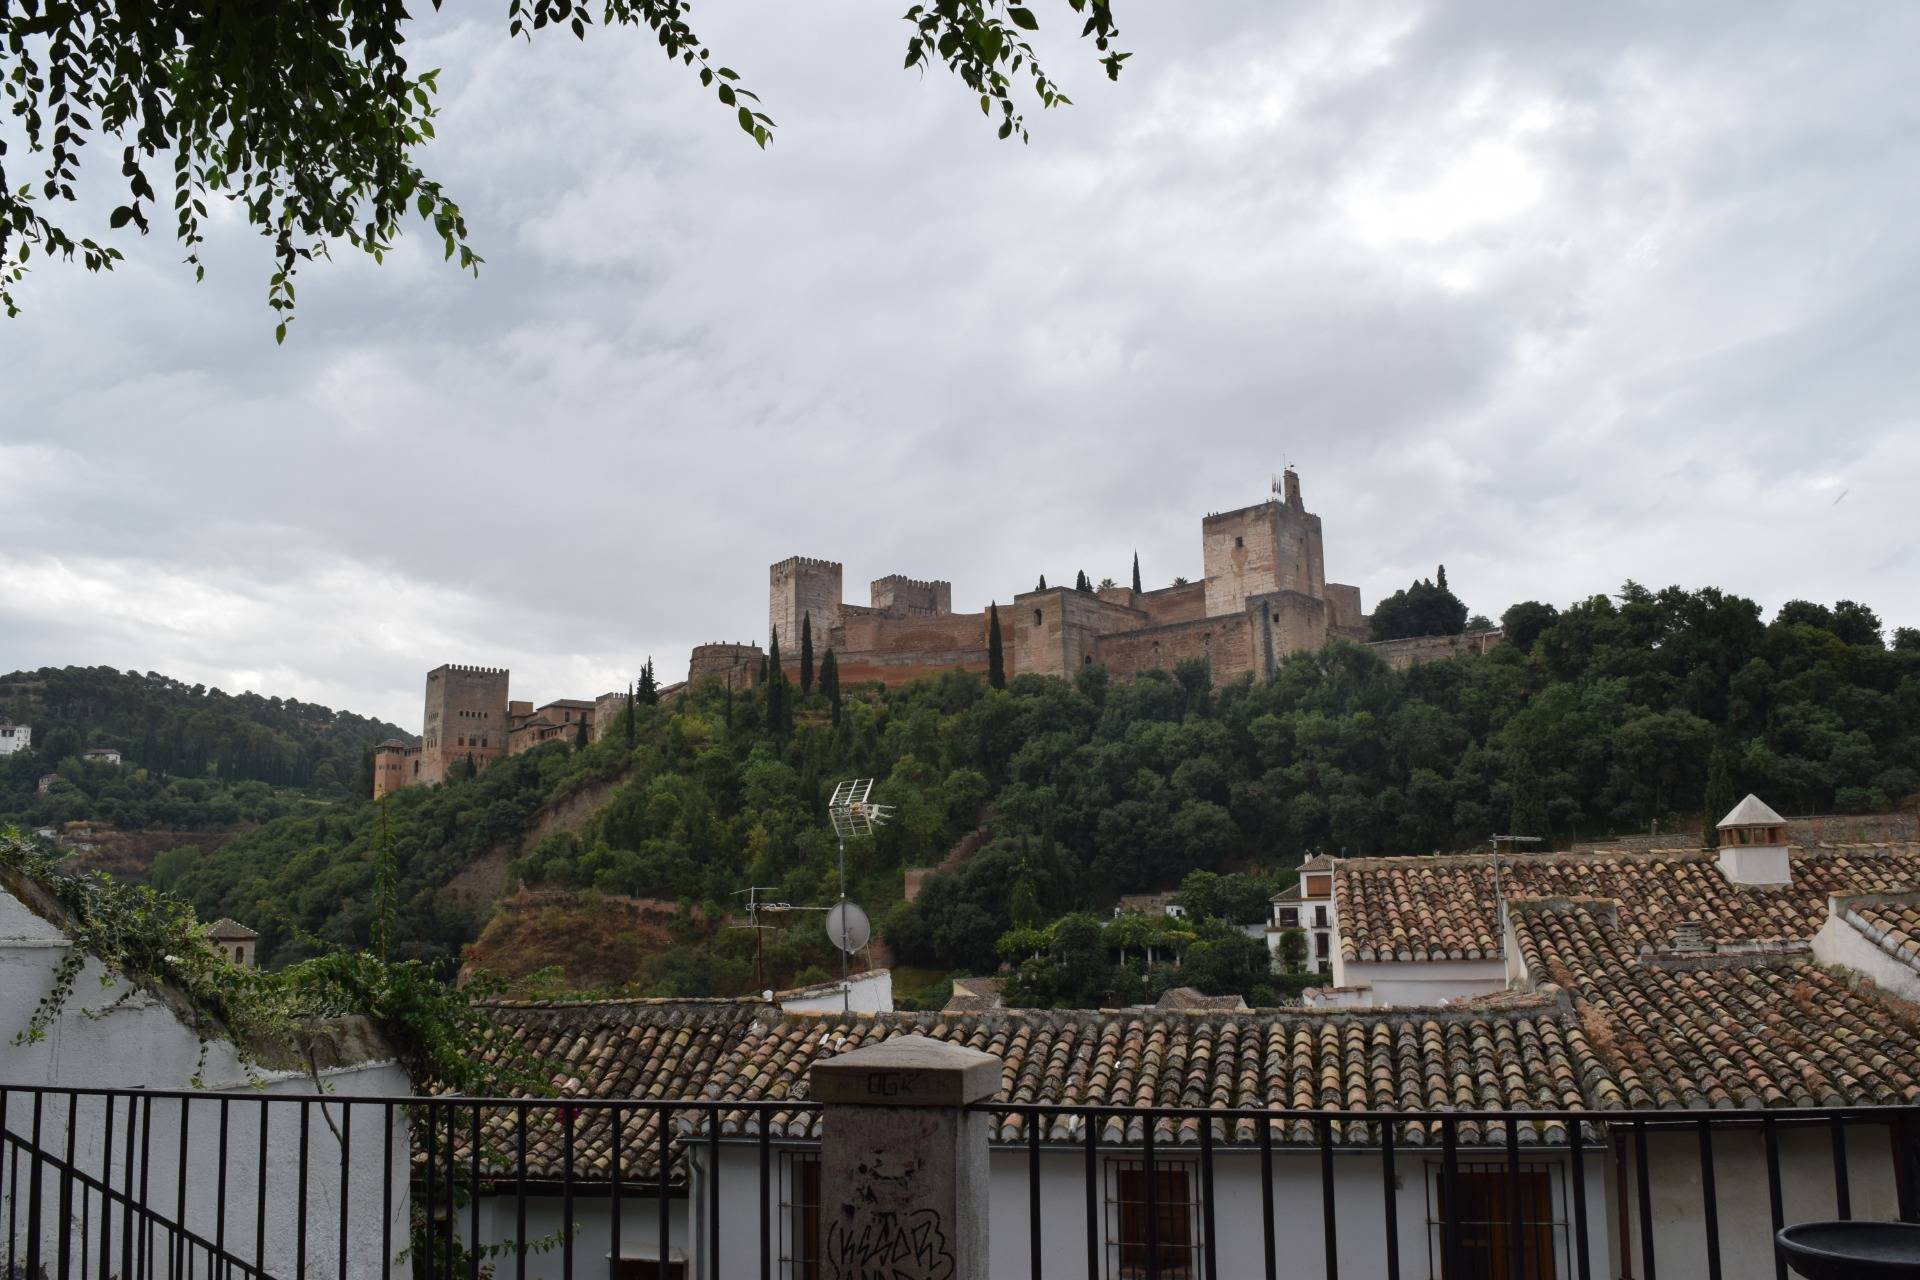 The mighty Alhambra